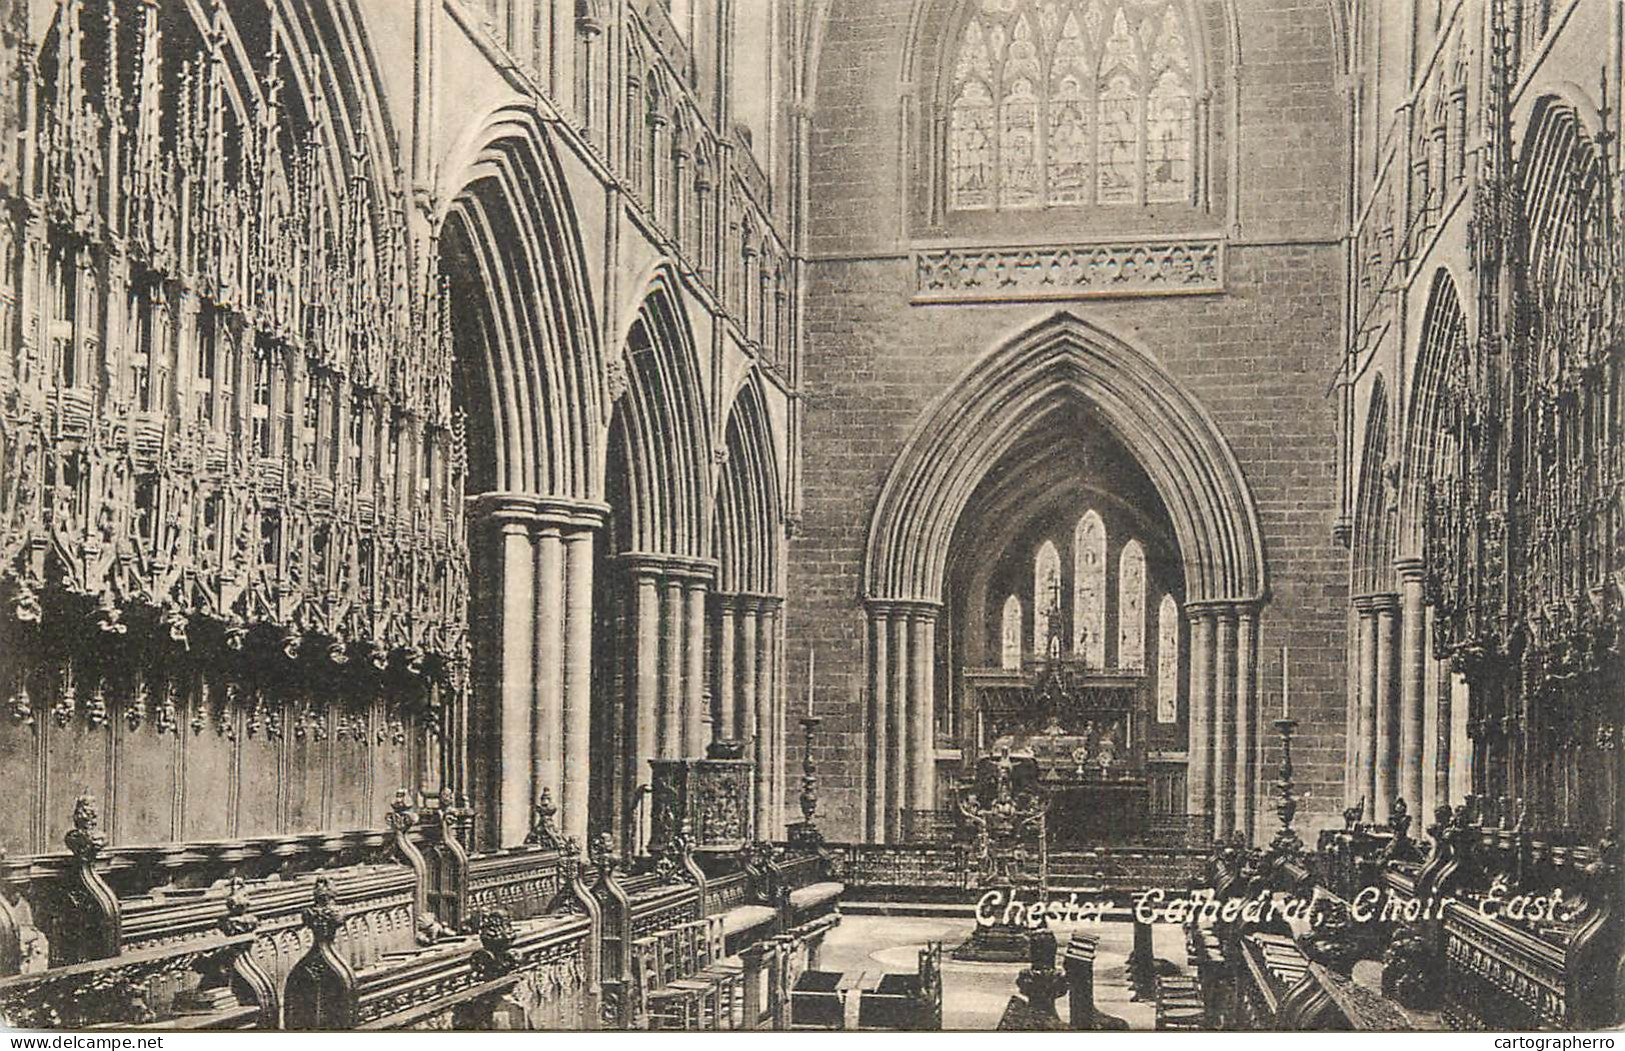 British Churches & Cathedrals Chester Cathedral Choir East - Churches & Cathedrals